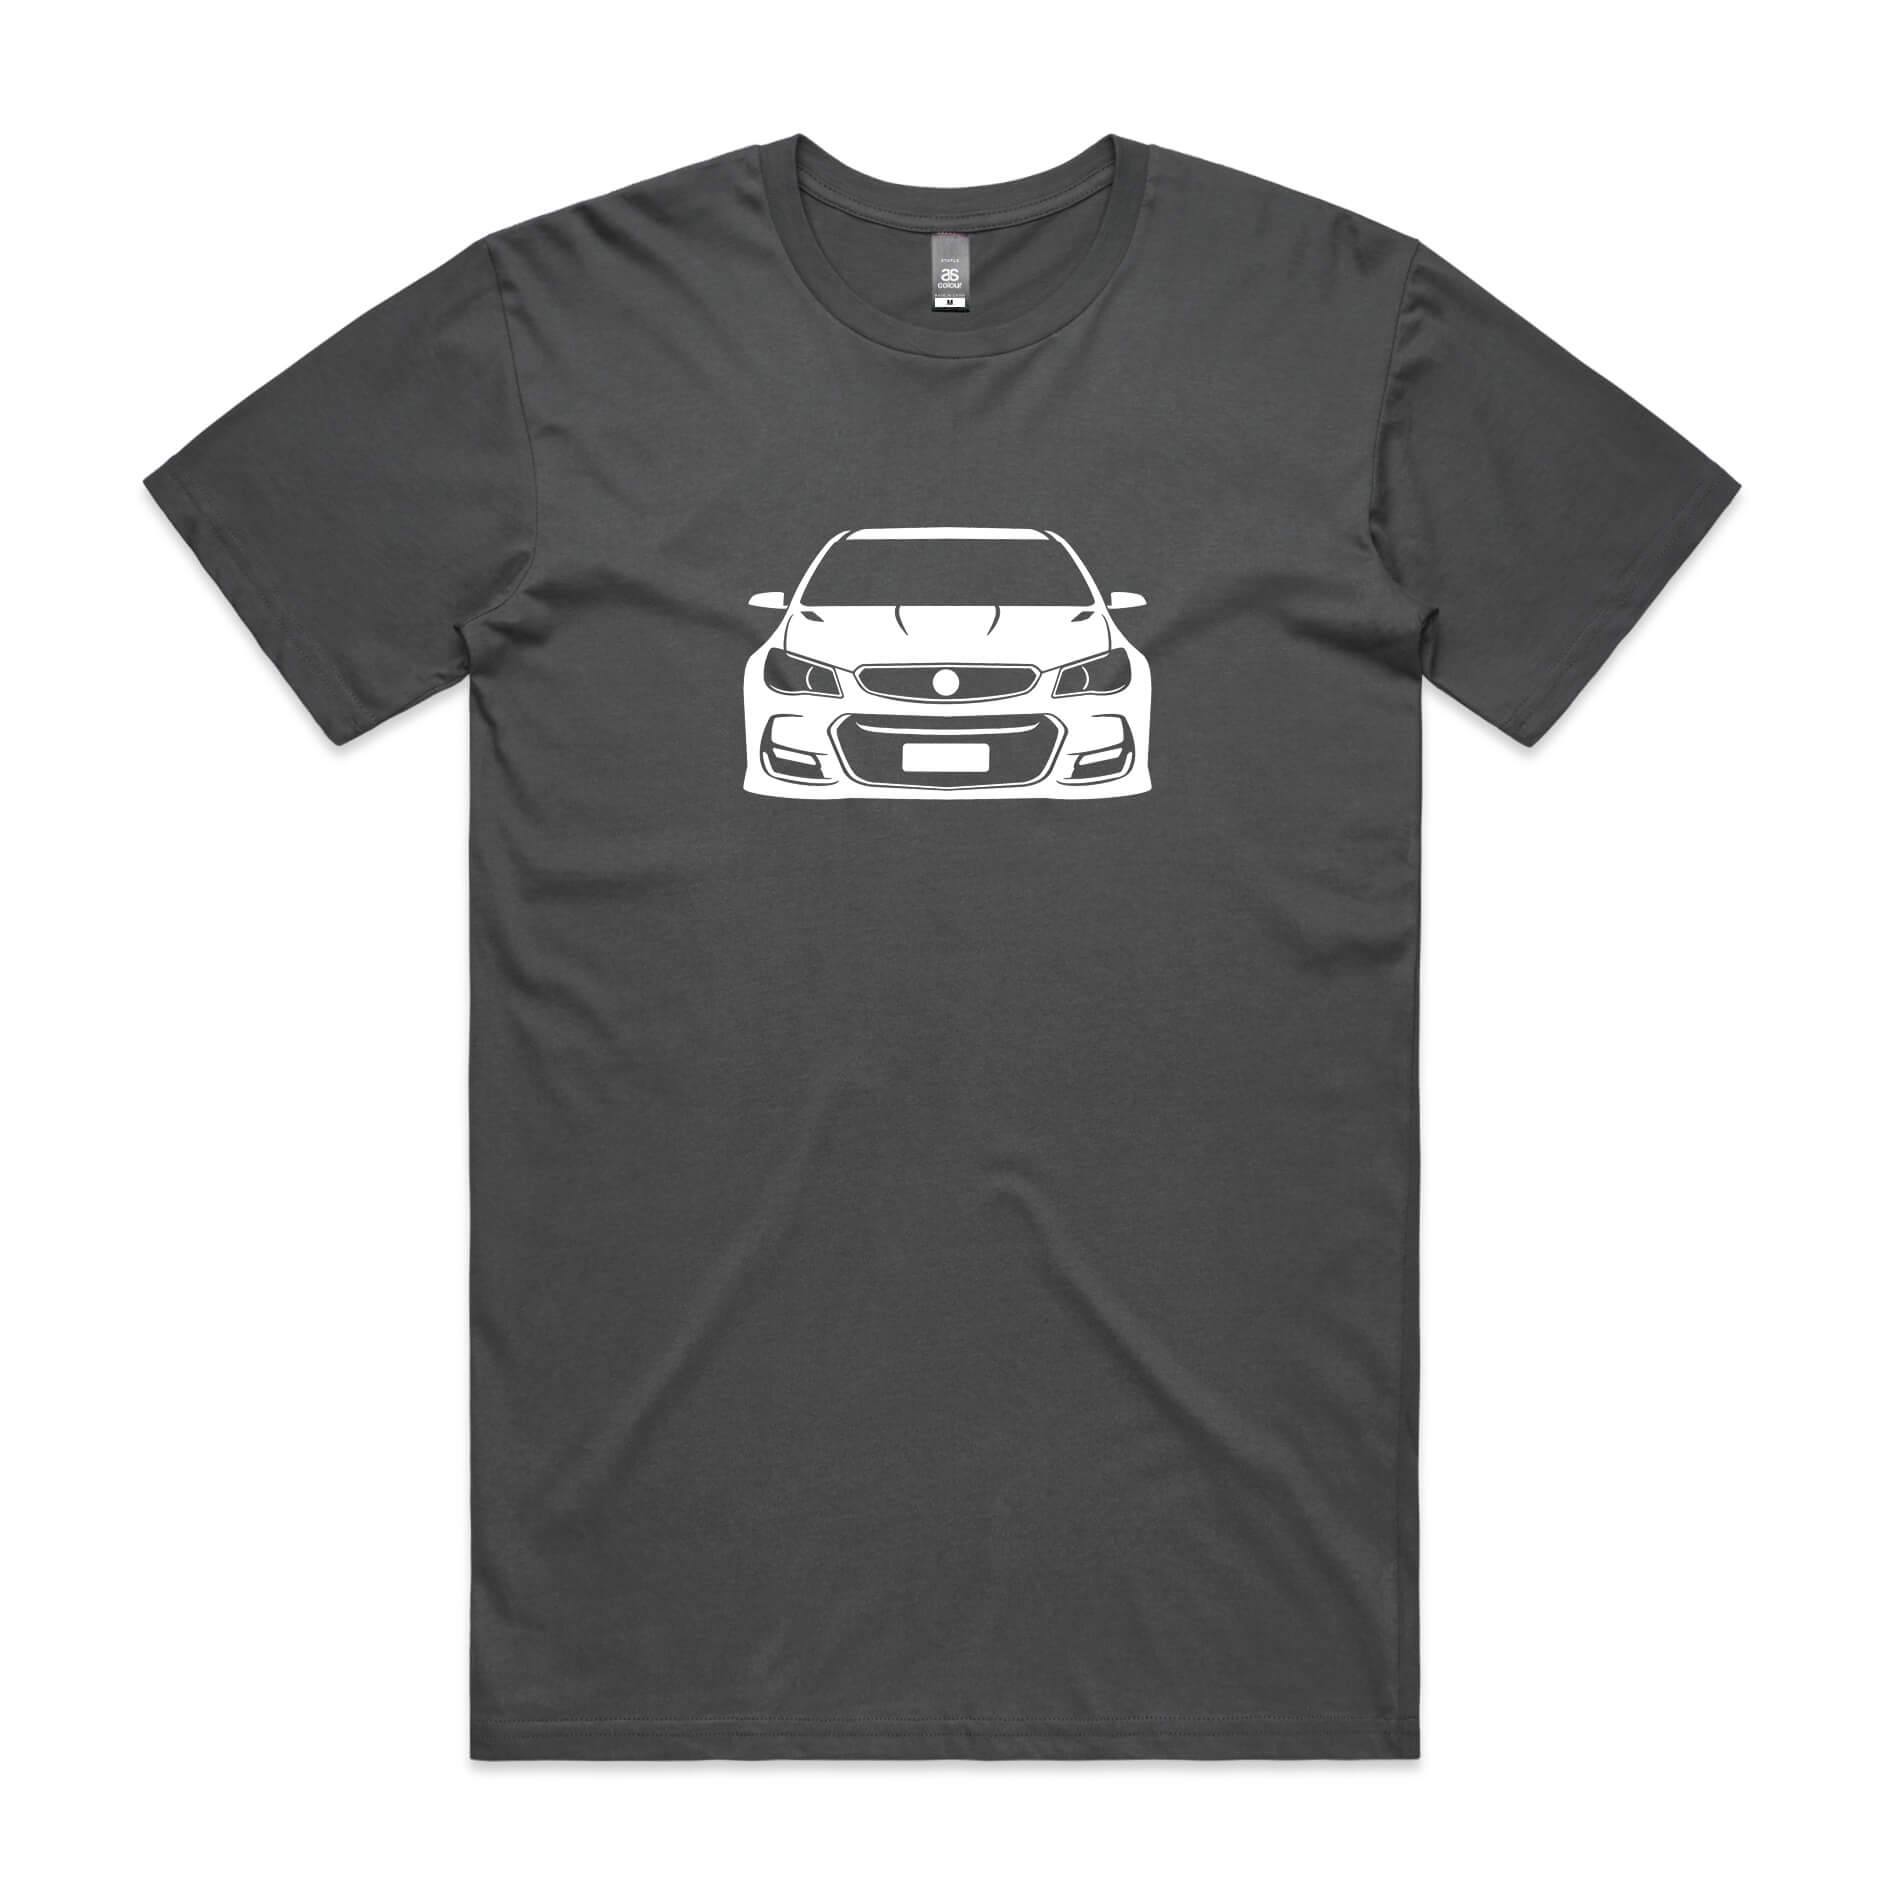 Holden VF Commodore t-shirt in charcoal grey